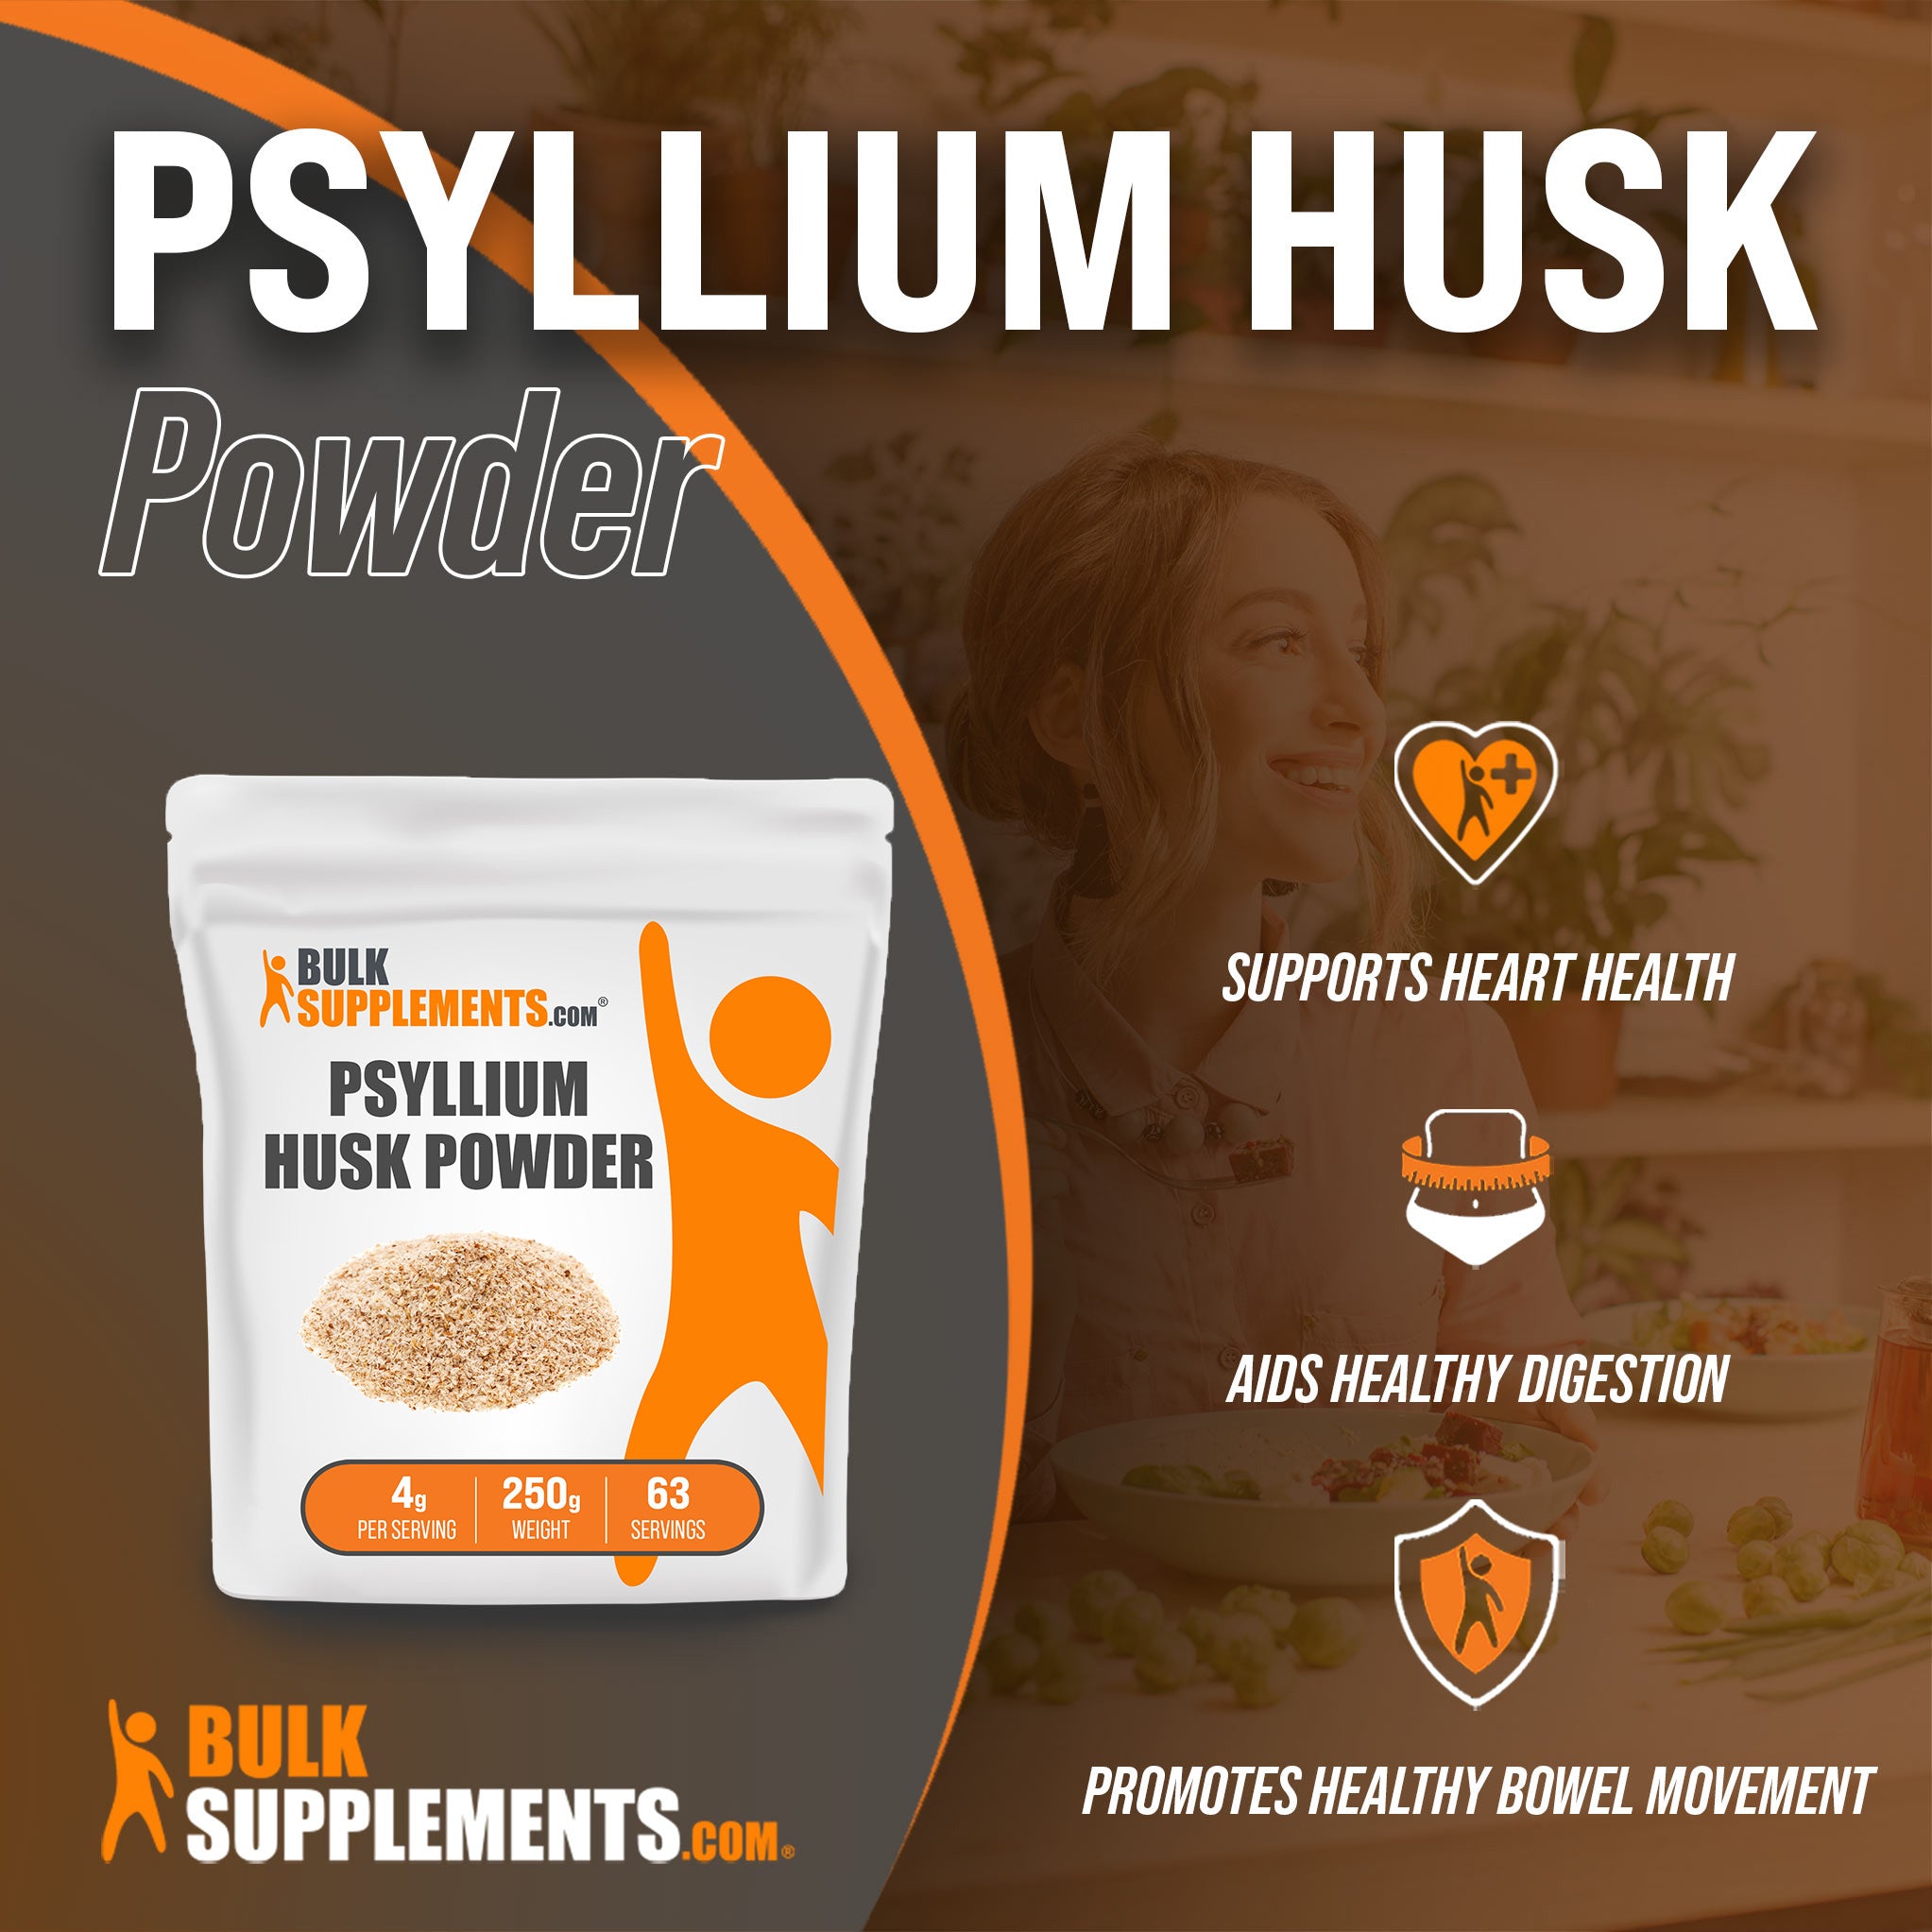 Benefits of Psyllium Husk Powder: supports heart health, aids healthy digestion, promotes healthy bowel movement